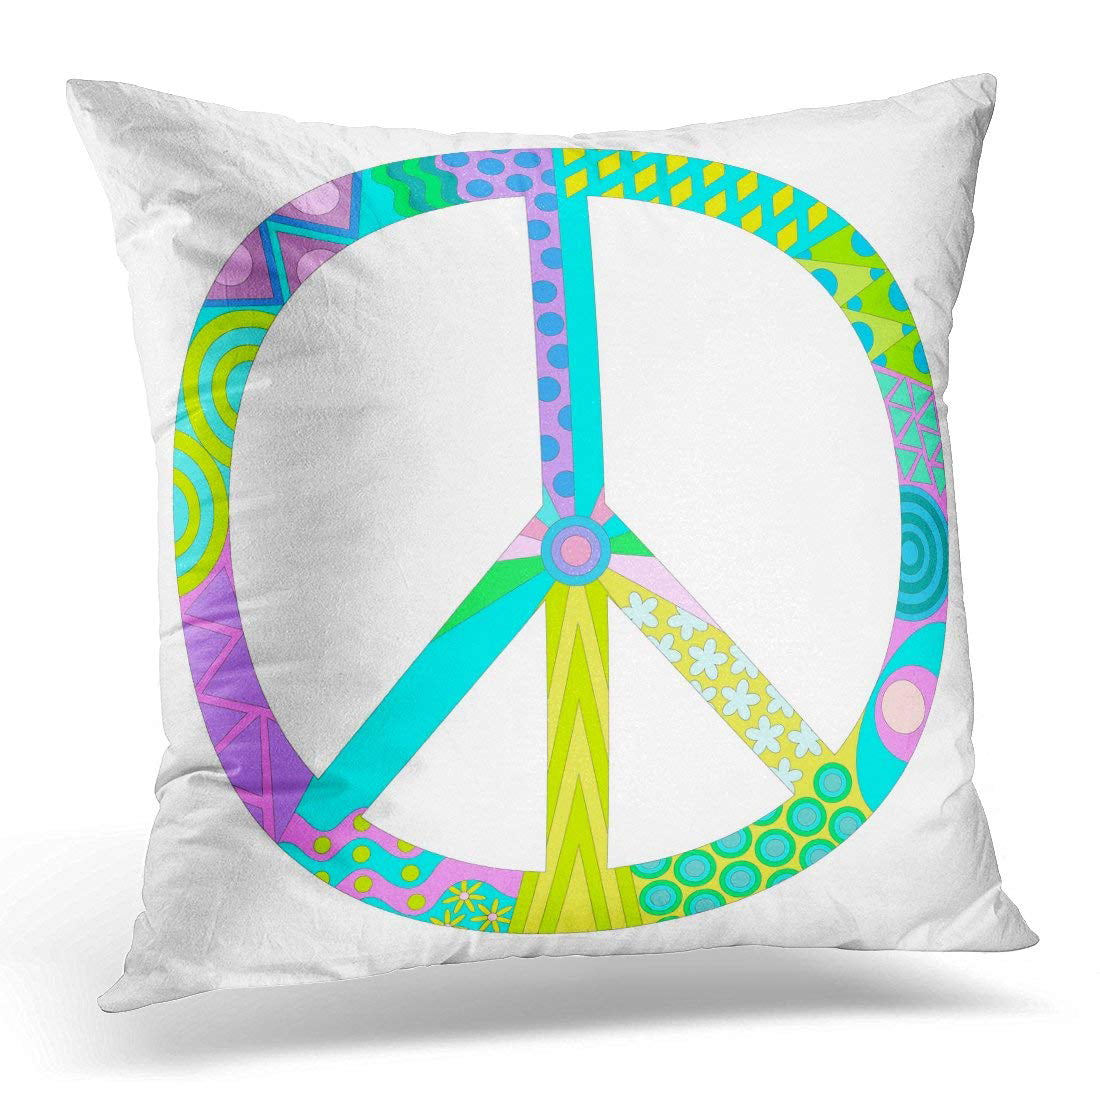 Multicolor 18x18 InGENIUS Peace Sign Hippie Retro Sunflower Butterfly Nature Colorful Throw Pillow